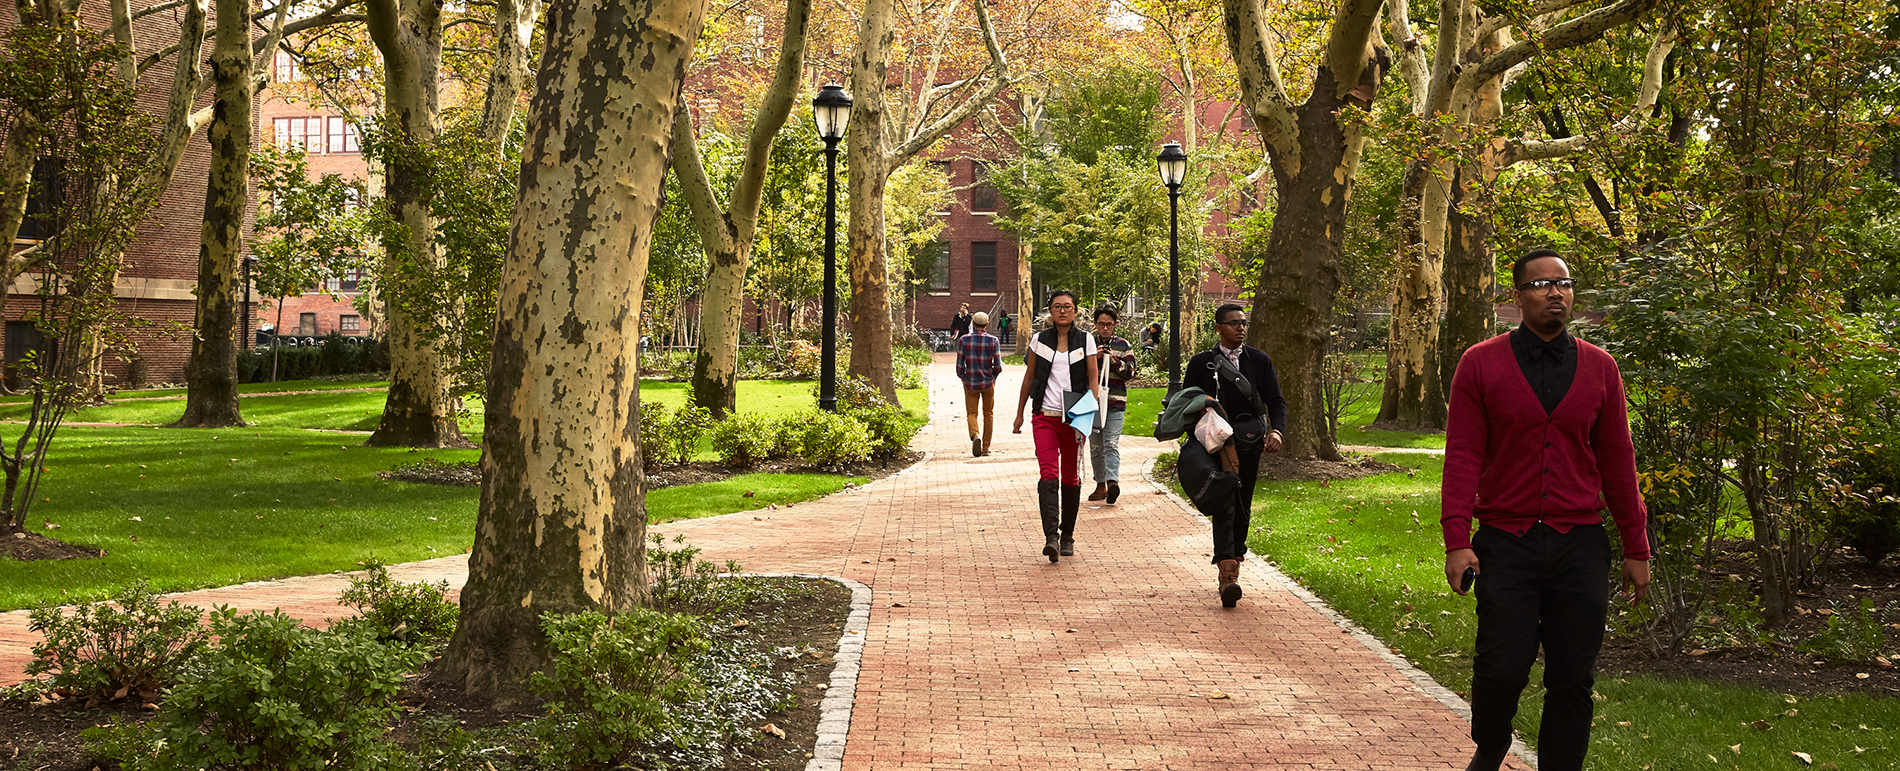 Students walk through a wooded park on red brick path.